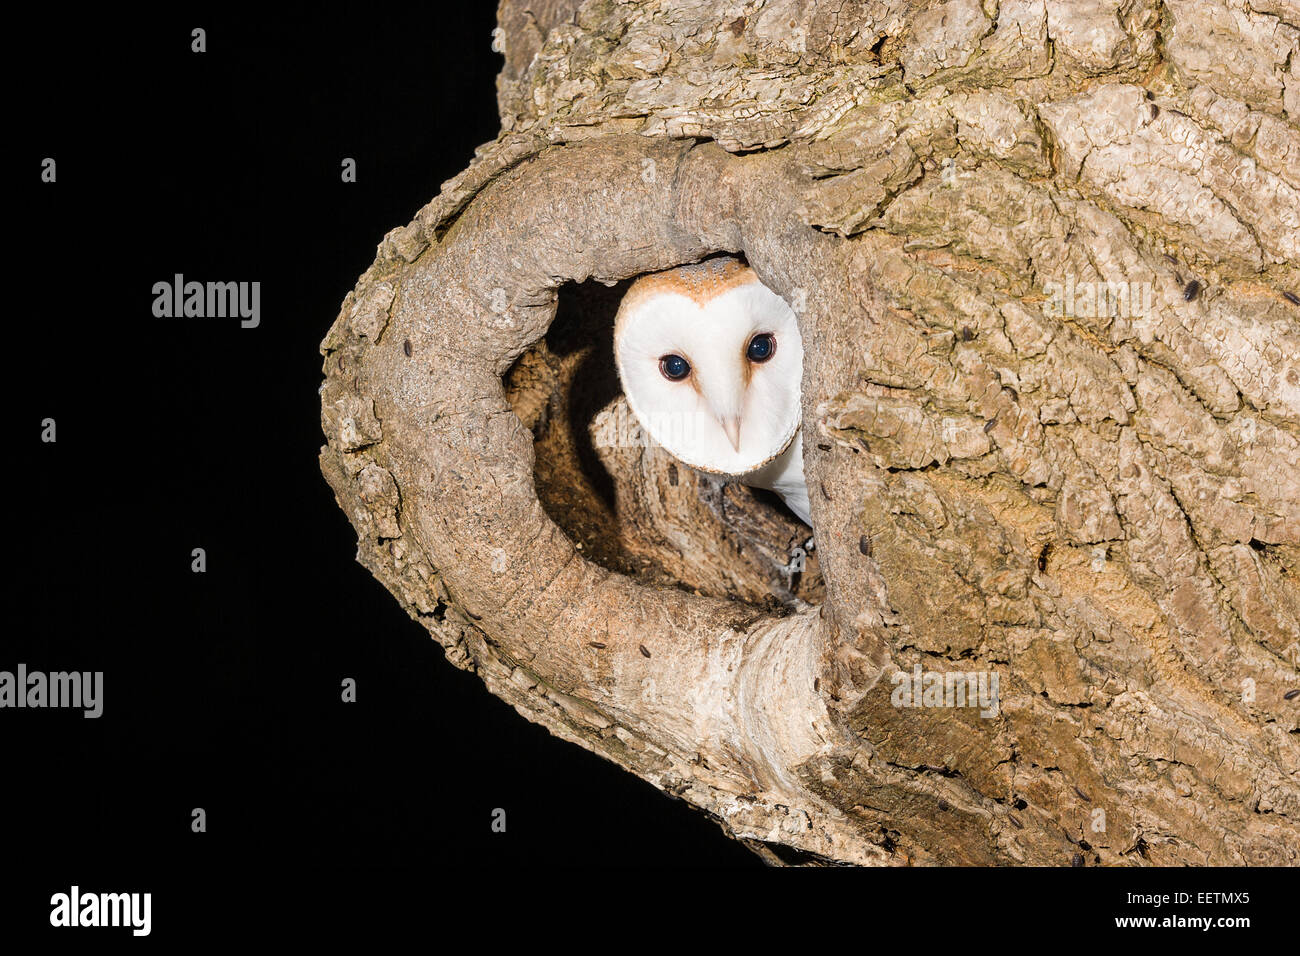 A young Barn Owl looks out from its nest hole in an Ash tree. Photograph was taken in County Tipperary, Ireland. Barn owls are an endangered species. Stock Photo